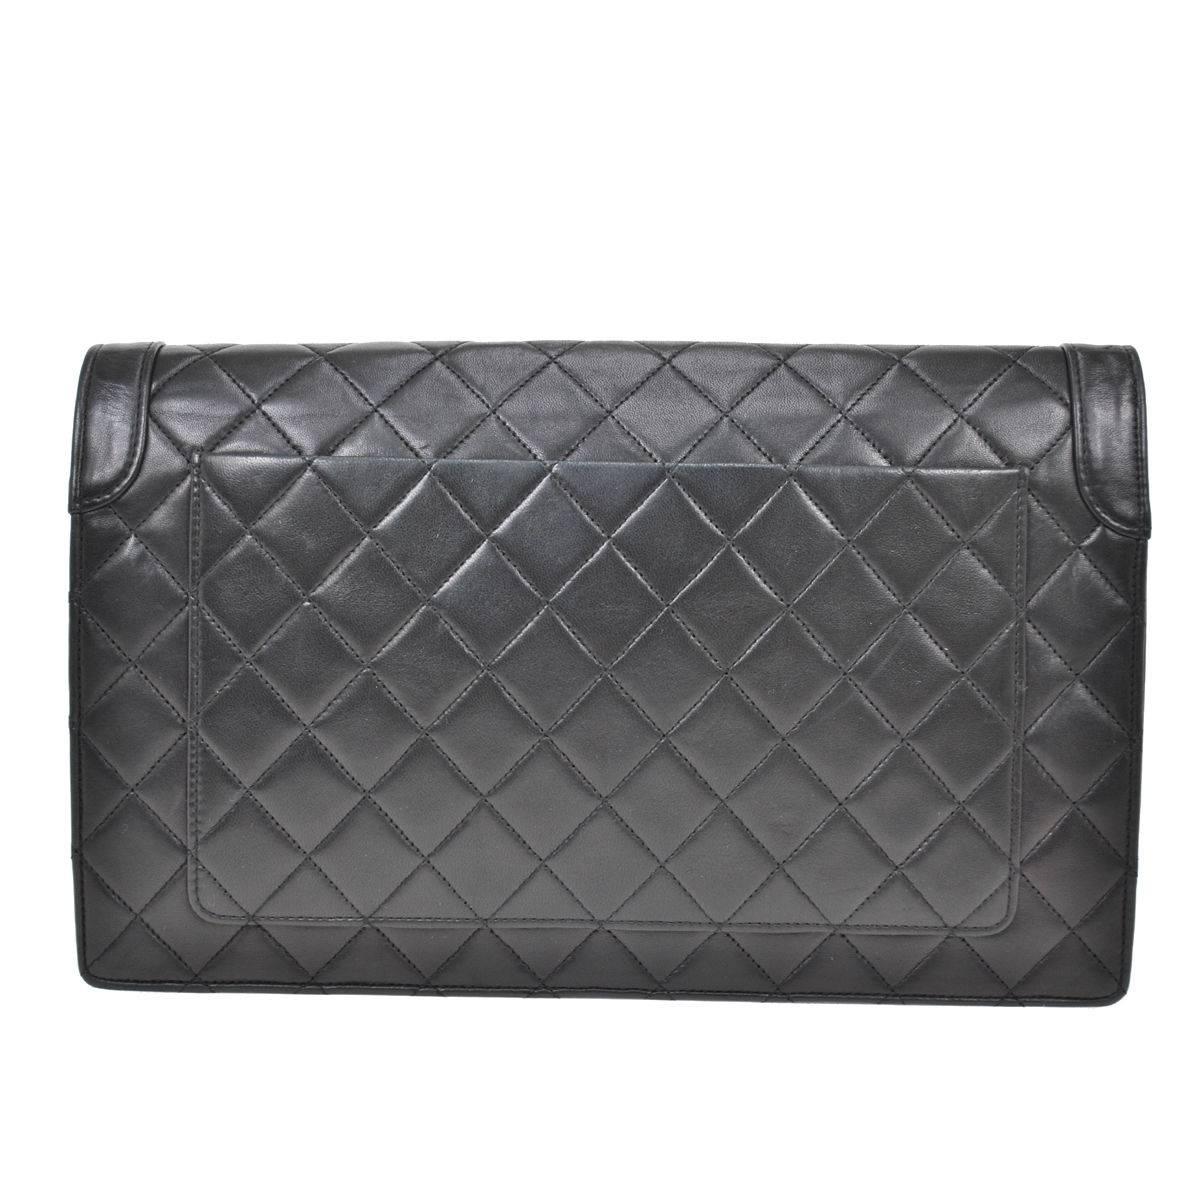 Women's Chanel Black Leather Ribbed Evening Clutch Flap Bag